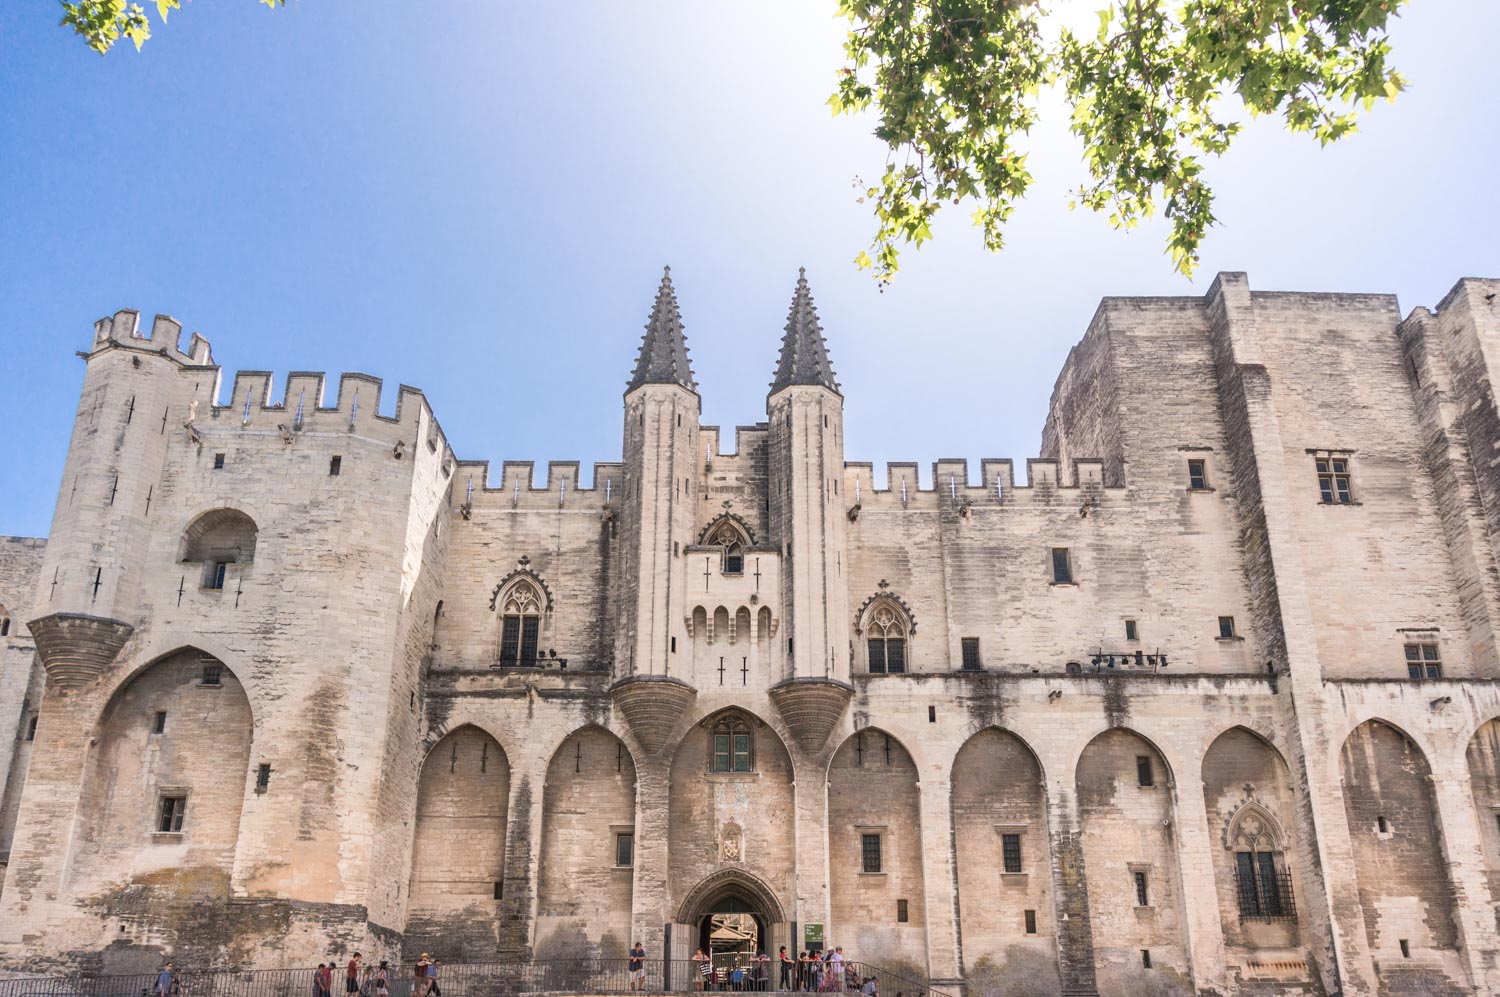 A month in France – Avignon